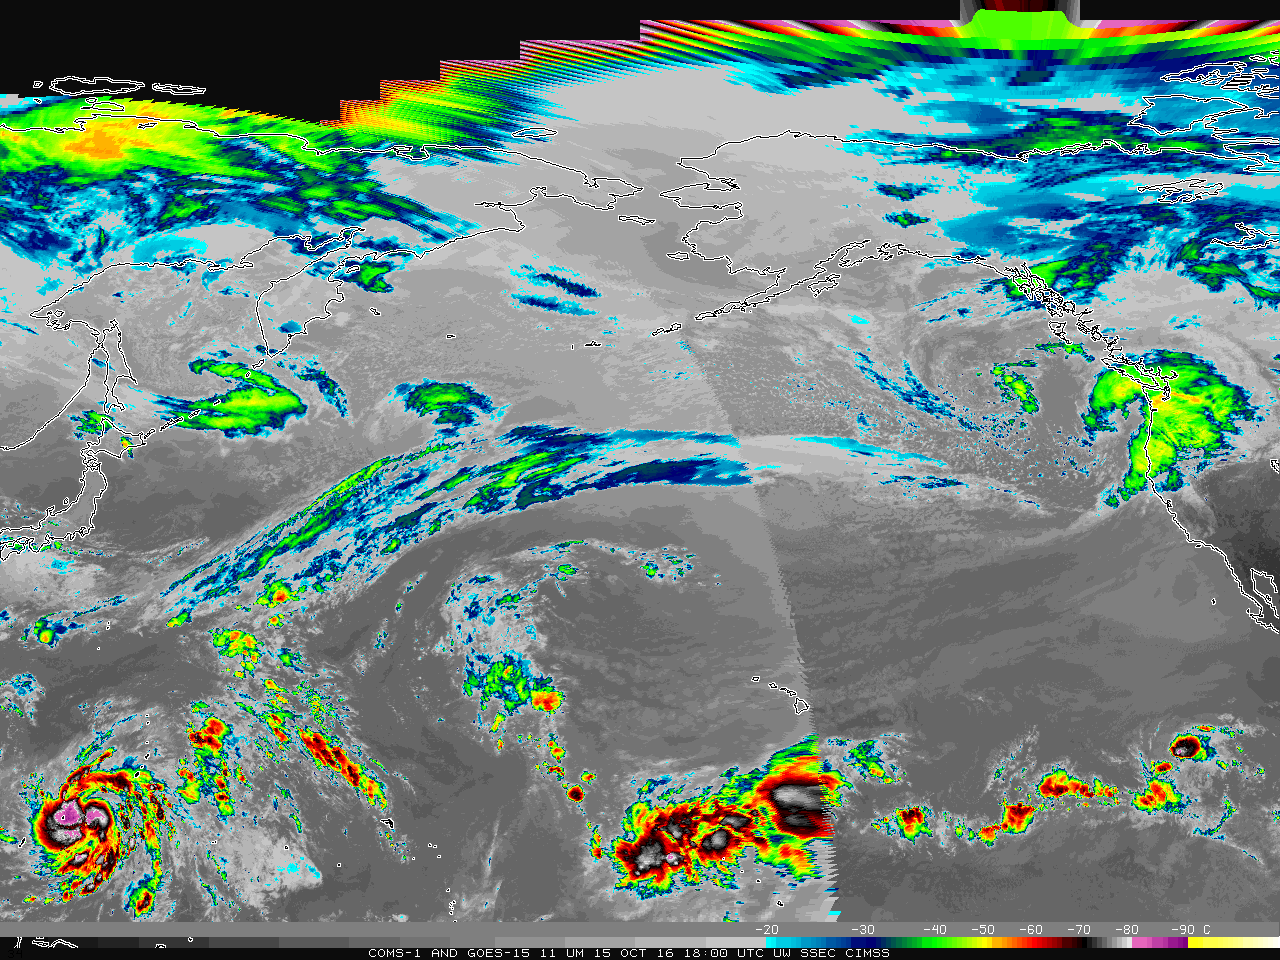 Window Channel Infrared imagery from COMS-1 (10.8 µm) and GOES-15 (10.7 µm), every 6 hours from 1200 UTC on 7 October through 1800 UTC on 15 October [click to animate]